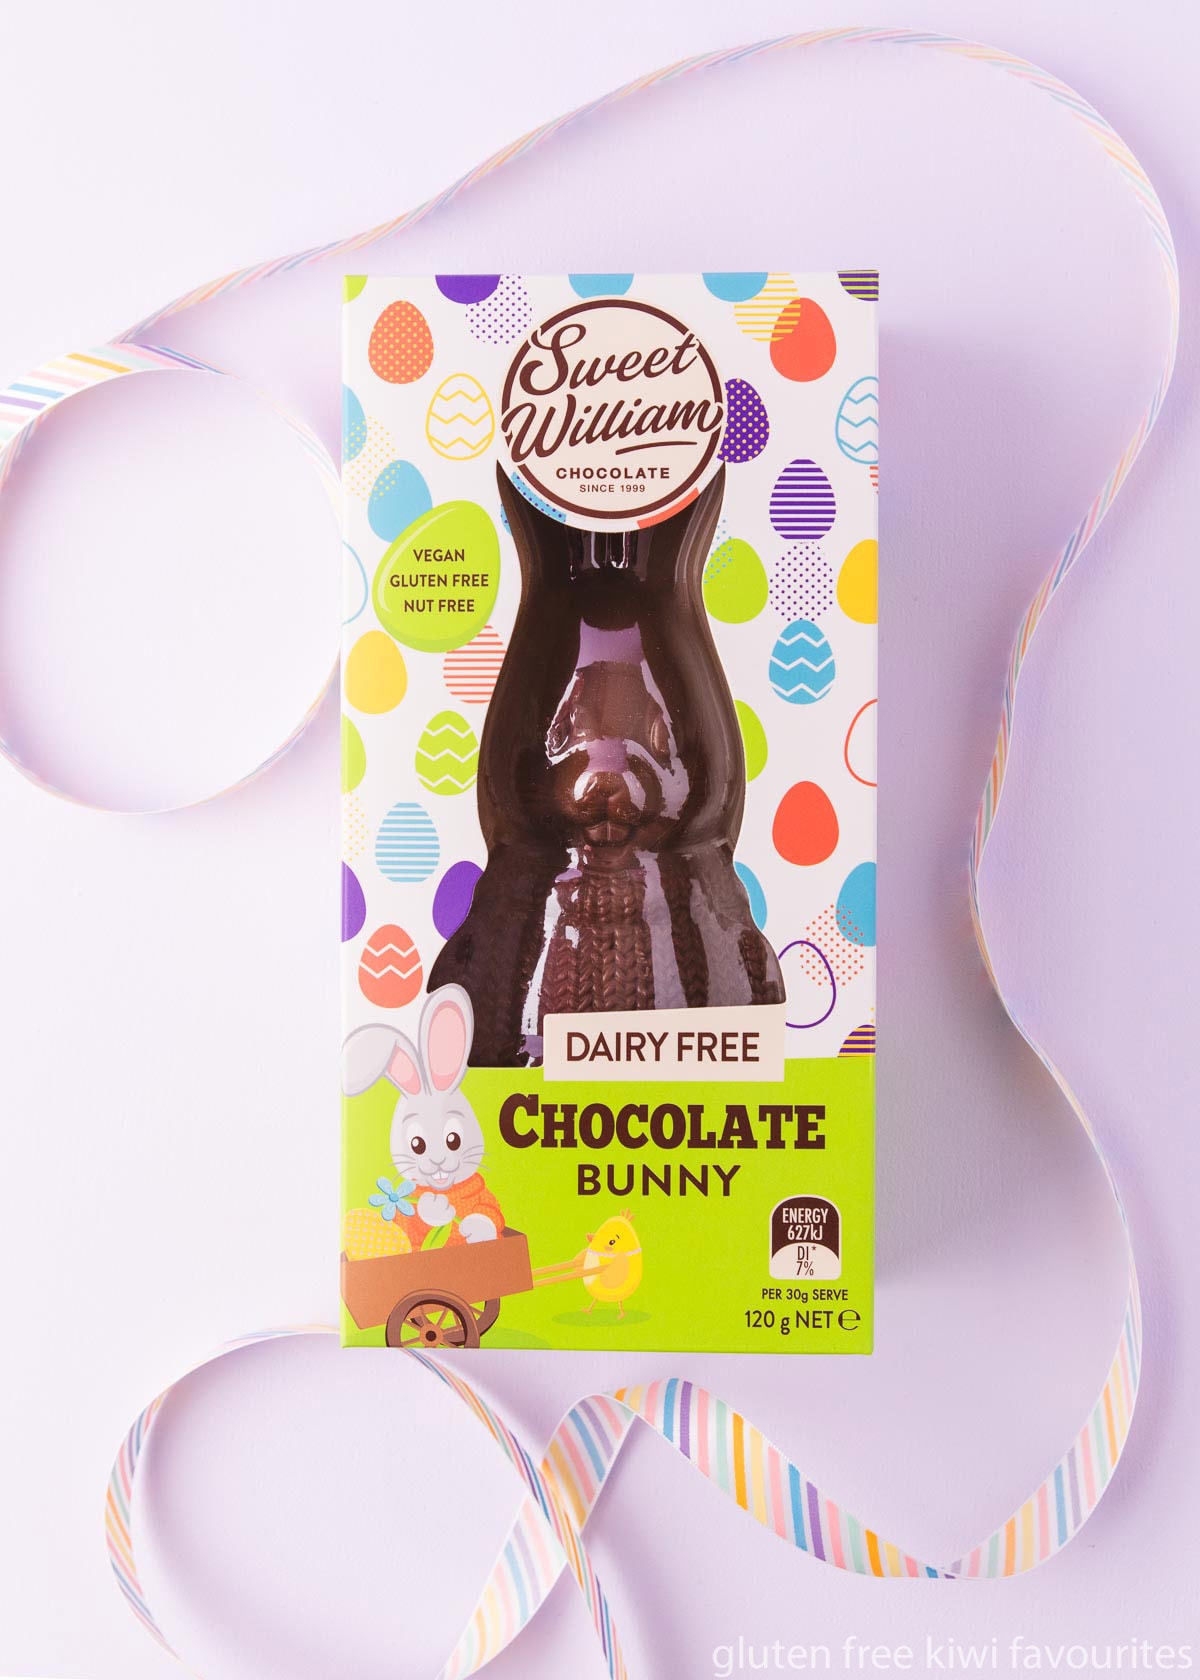 A Sweet William dairy free chocolate bunny in a colourful box on a light purple background.